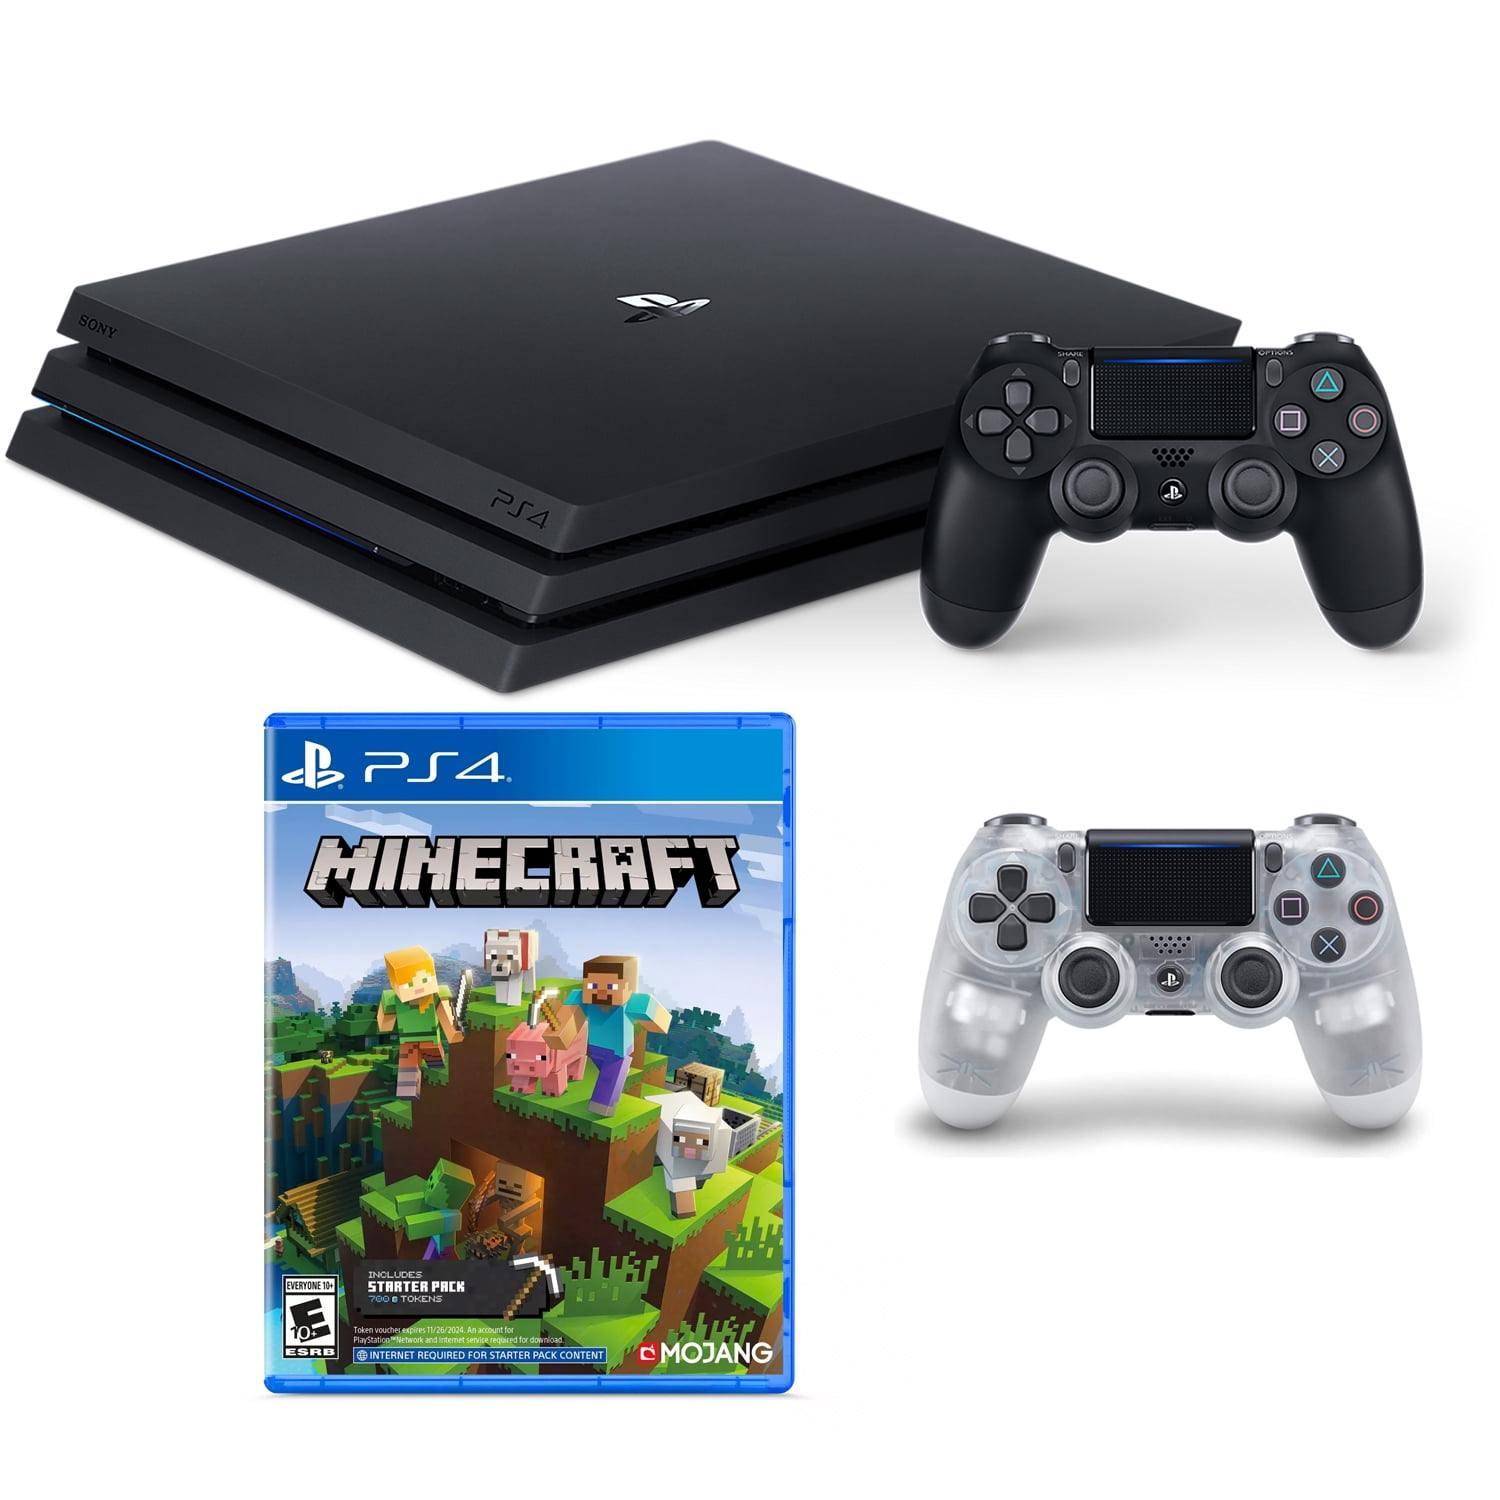 Minecraft Game, PS4 Console and Crystal 